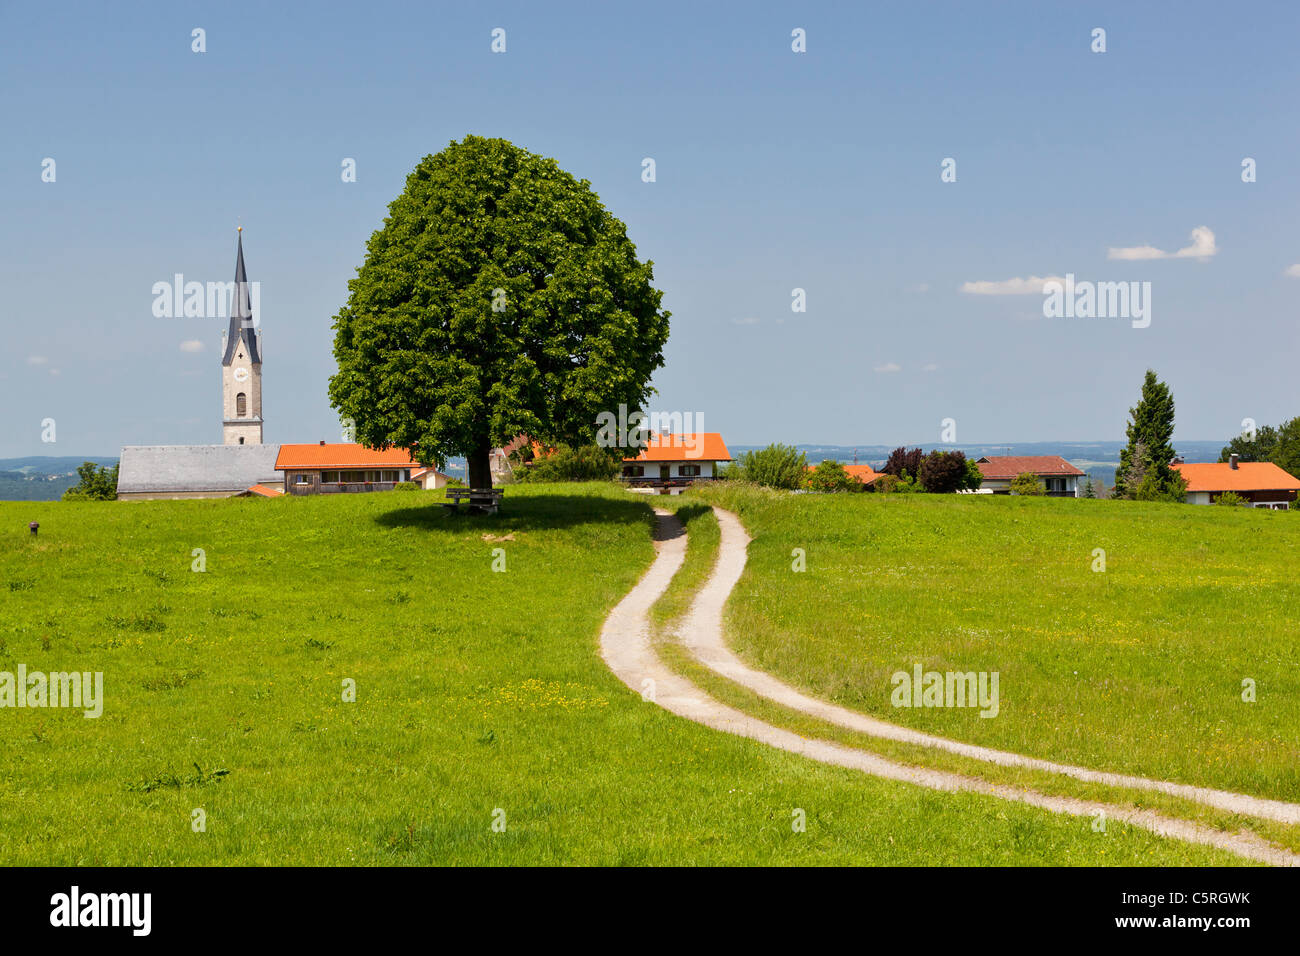 Germany, Bavaria, Irschenberg, View of Tilia tree and dirt track with village in background Stock Photo